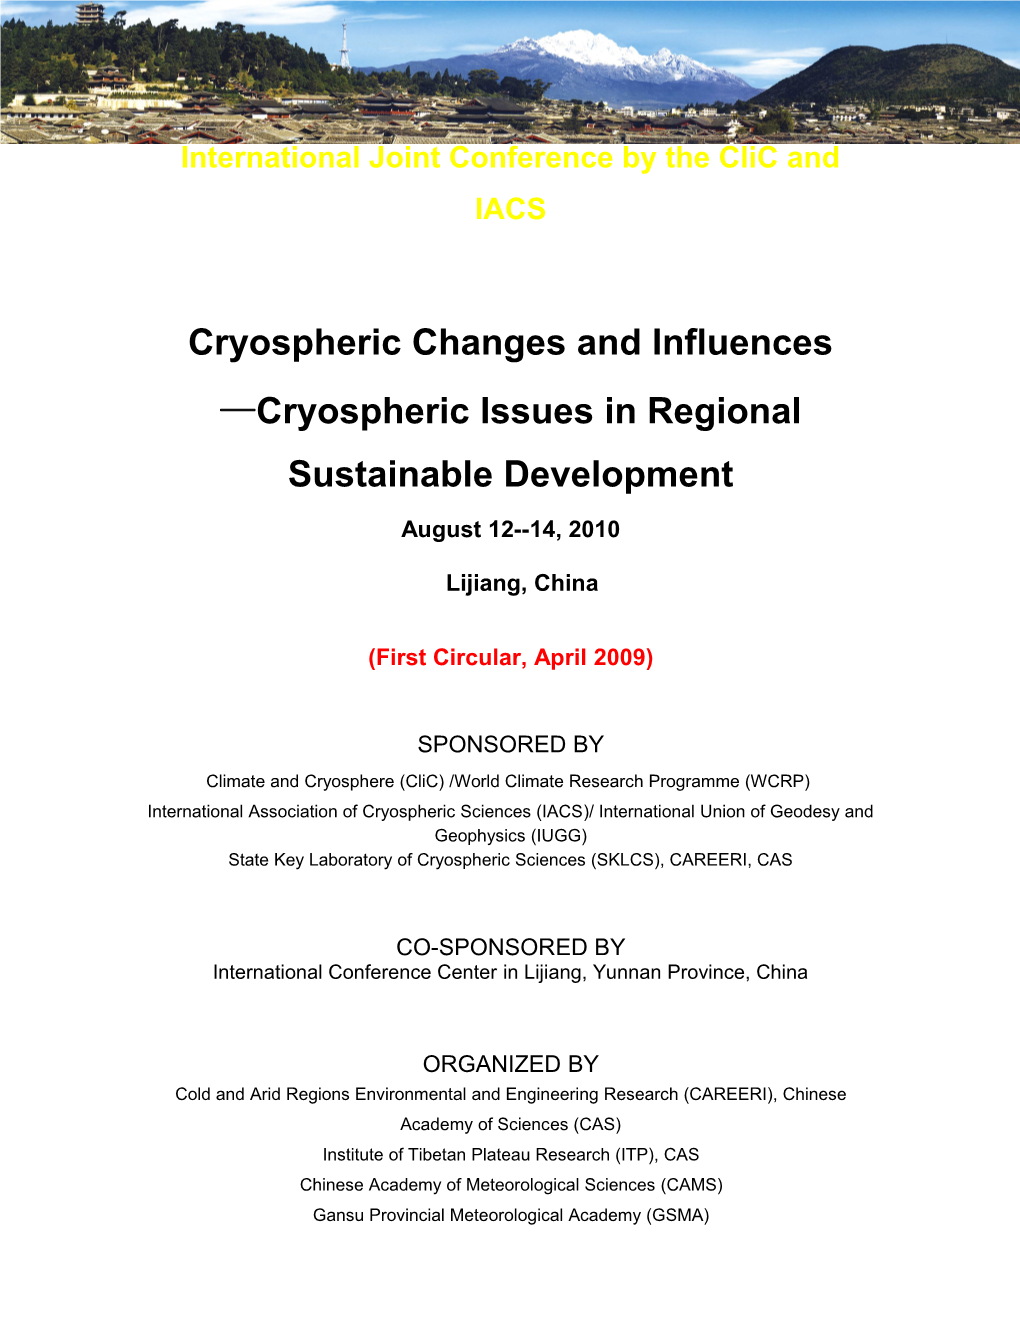 International Joint Conference by the Clic and IACS